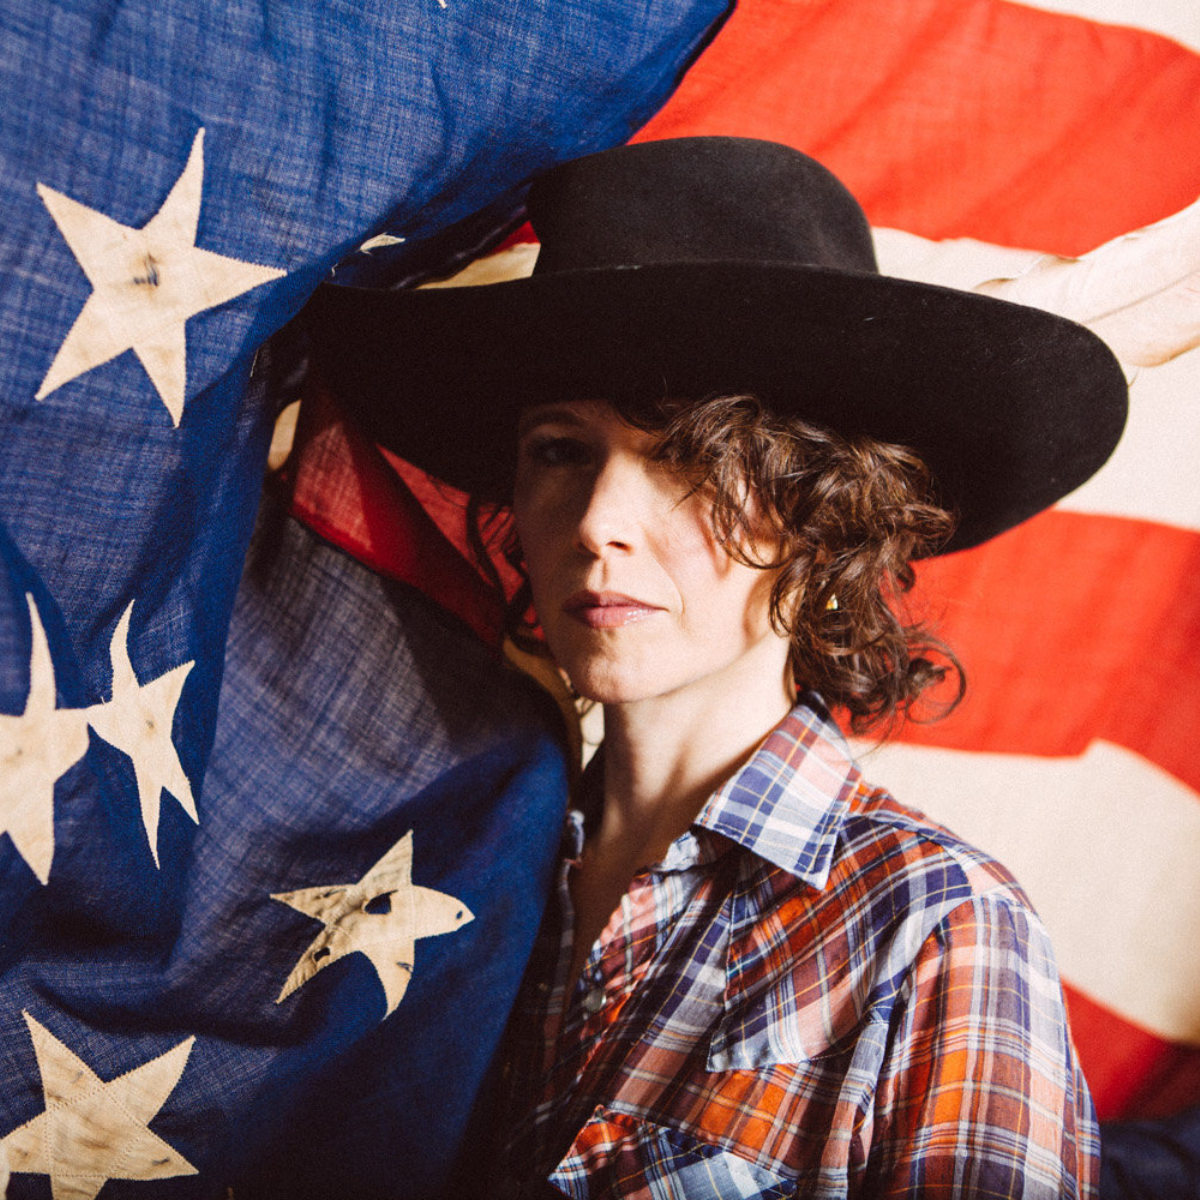 GIVEAWAY - Win tickets to 'American Folk' at the GRAMMY Museum (LA) 1/25